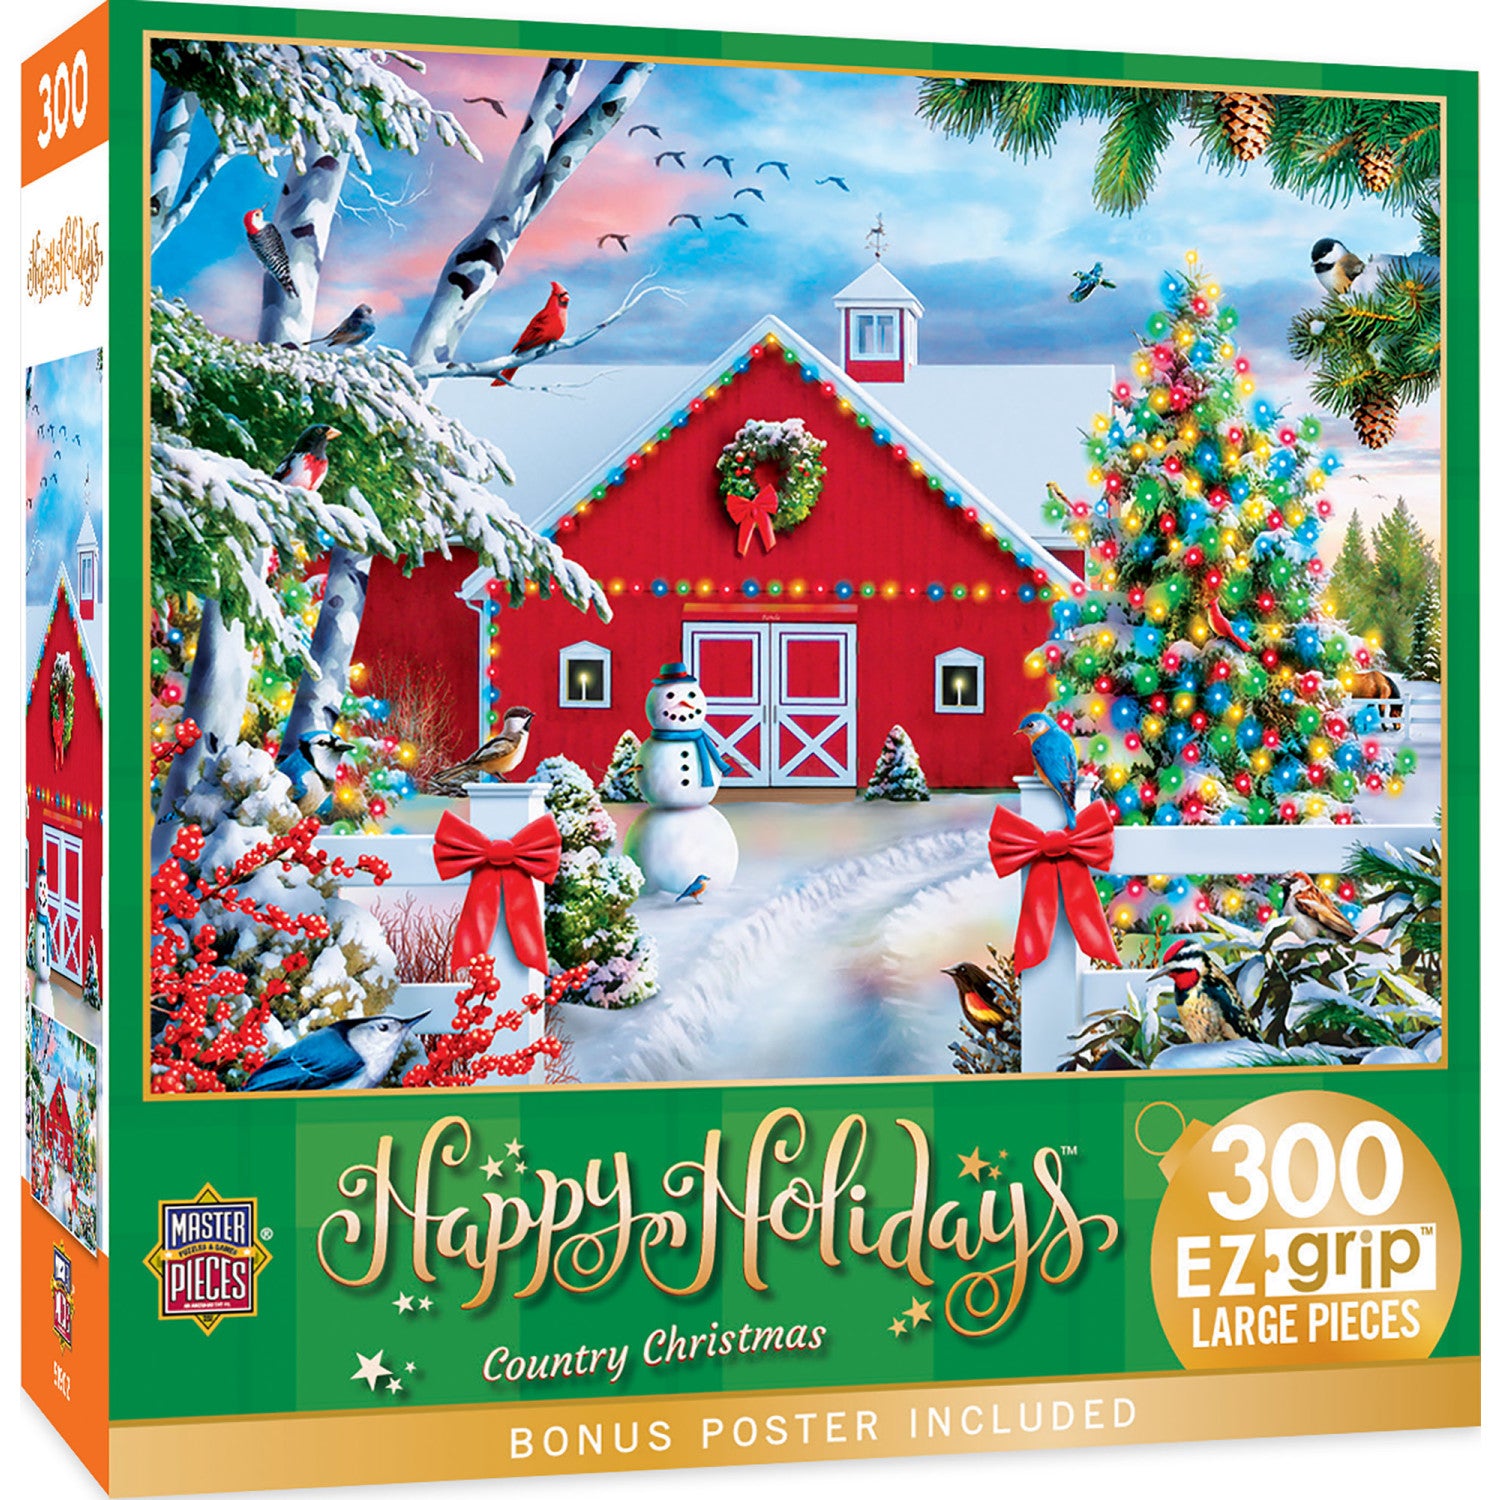 Happy Holidays - Country Christmas 300 Piece EZ Grip Puzzle